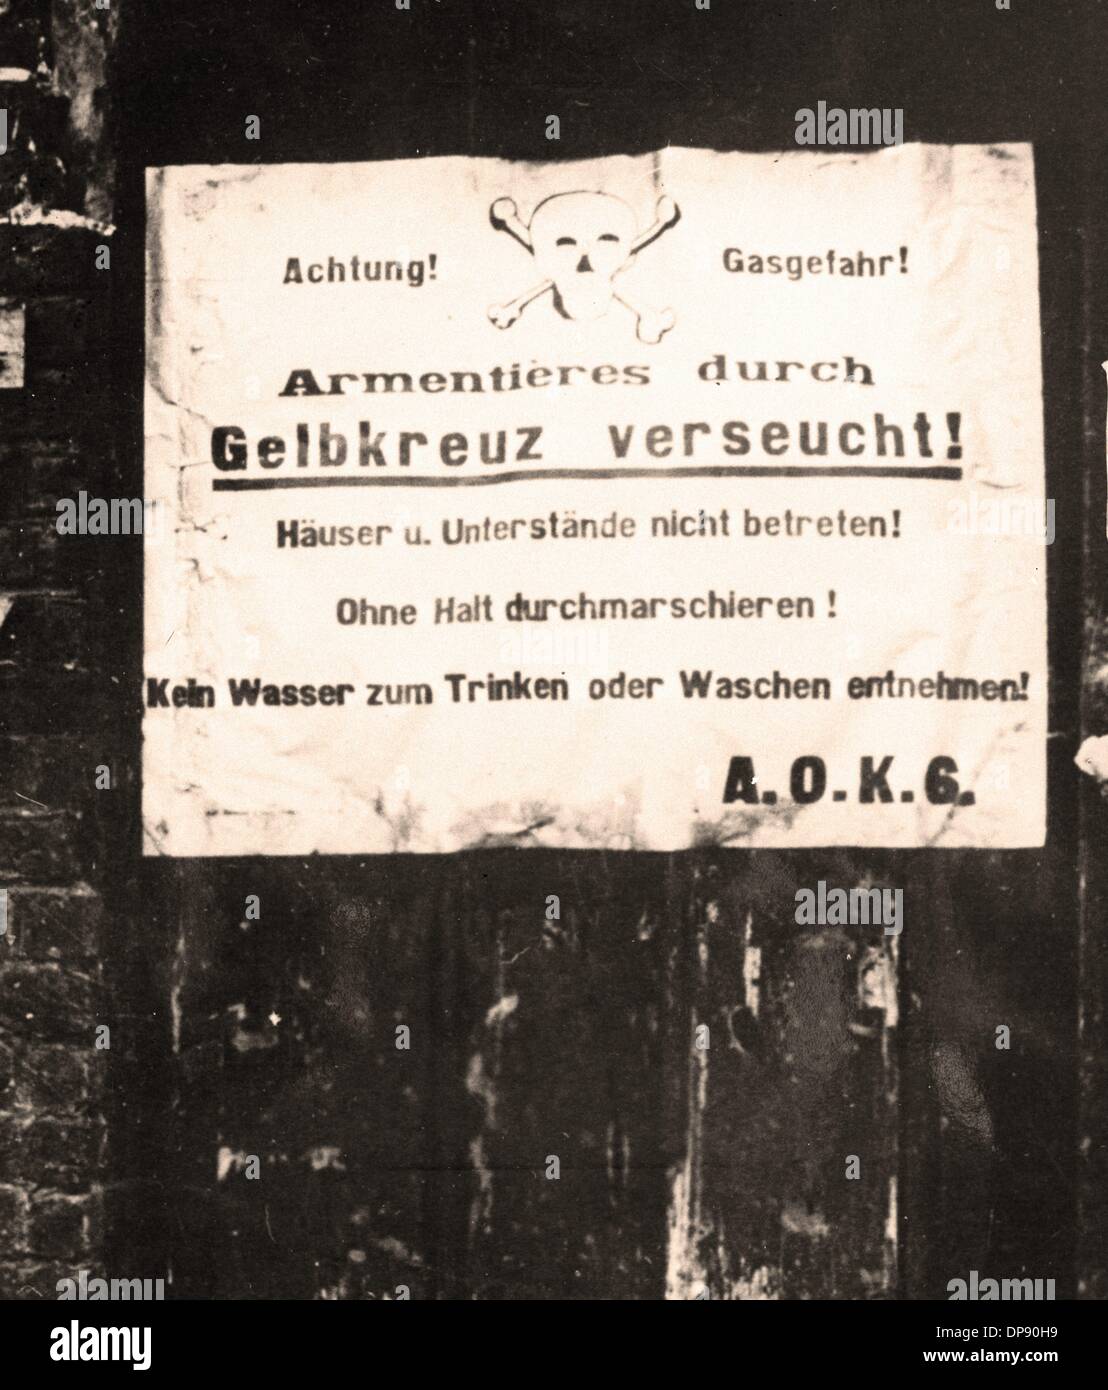 German warning sign in Armentieres, France, reading: 'Attention! Danger of Gas! Armentieres contaminated with Gelbkreuz (Yellow Cross)! Do not enter houses or dugouts! Do not use water for drinking and washing! A.O.K.G.' The term 'Yellow Cross' (also: mustard gas) identitfied a skin damaging chemical warfare agent. The name of the gas derived from the artillery shells that carried the chemicals, which were painted with yellow crosses. Fotoarchiv für Zeitgeschichte Stock Photo